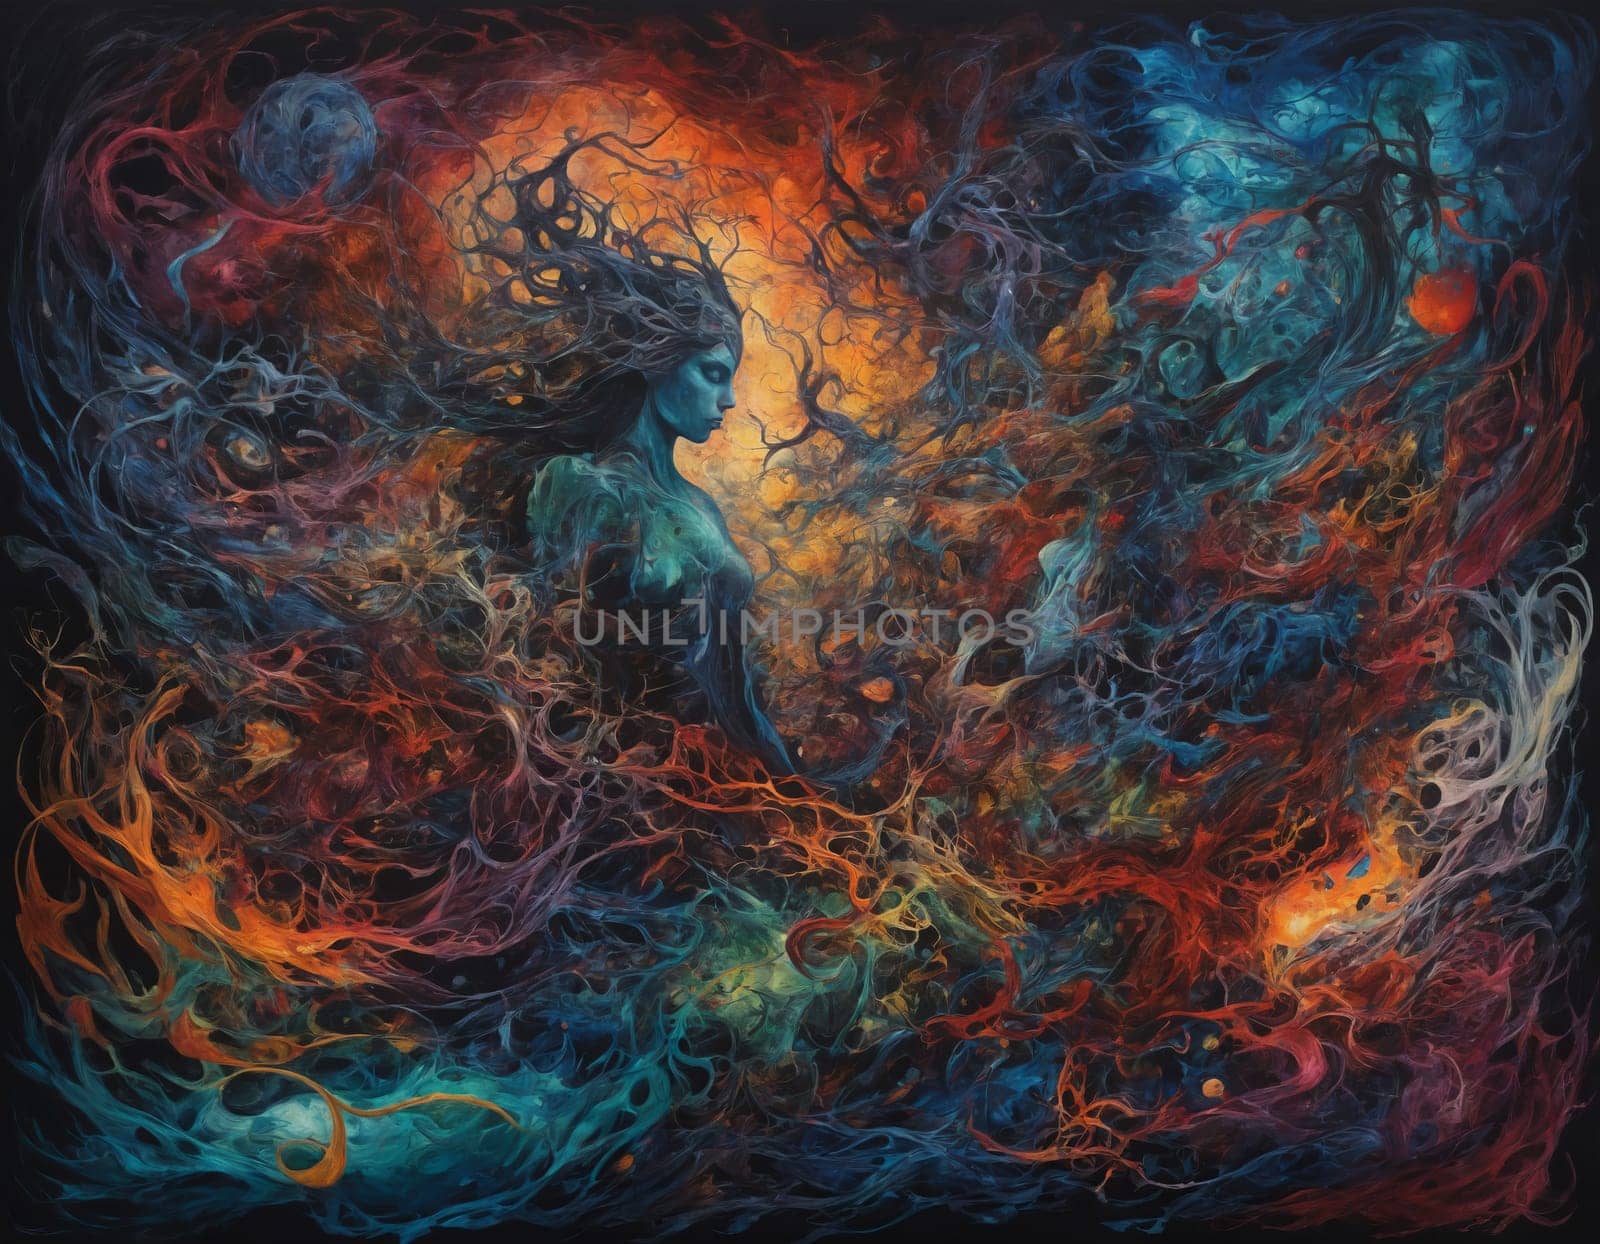 A captivating artwork showcasing an enigmatic figure surrounded by a chaotic yet beautiful blend of vibrant hues and forms. The image evokes a sense of mystical allure and cosmic wonder.